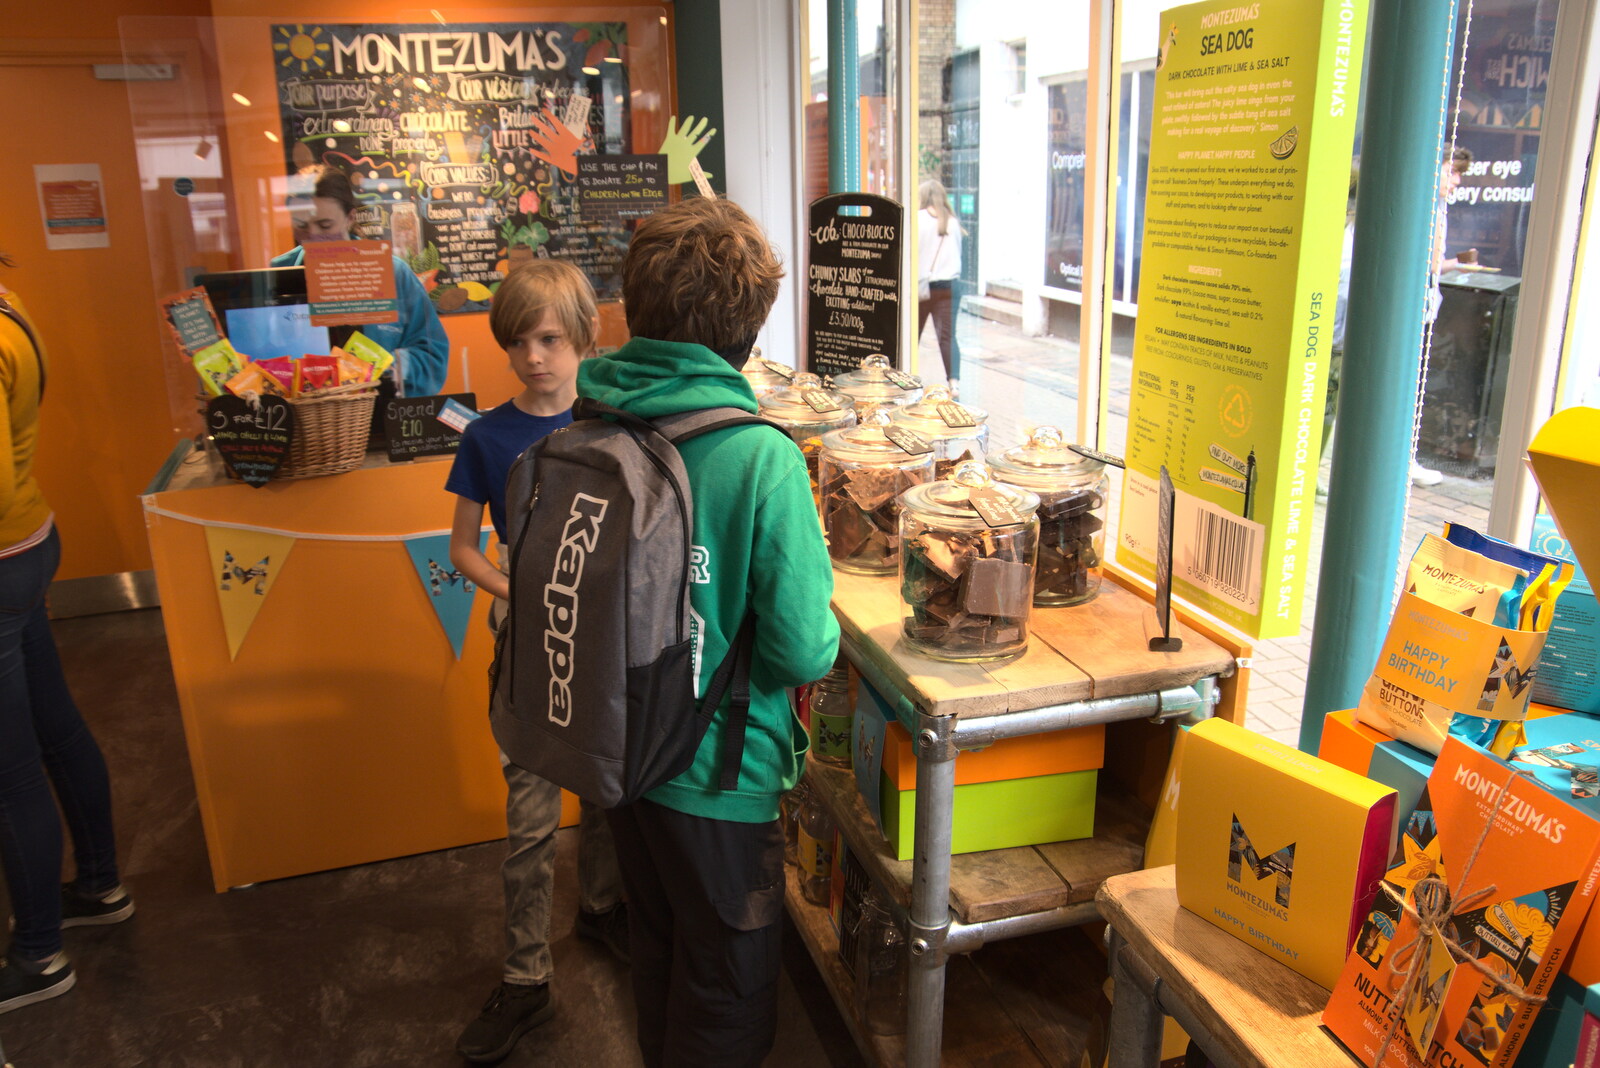 The boys in Montezuma's chocolate shop from Dippy and the City Dinosaur Trail, Norwich, Norfolk - 19th August 2021